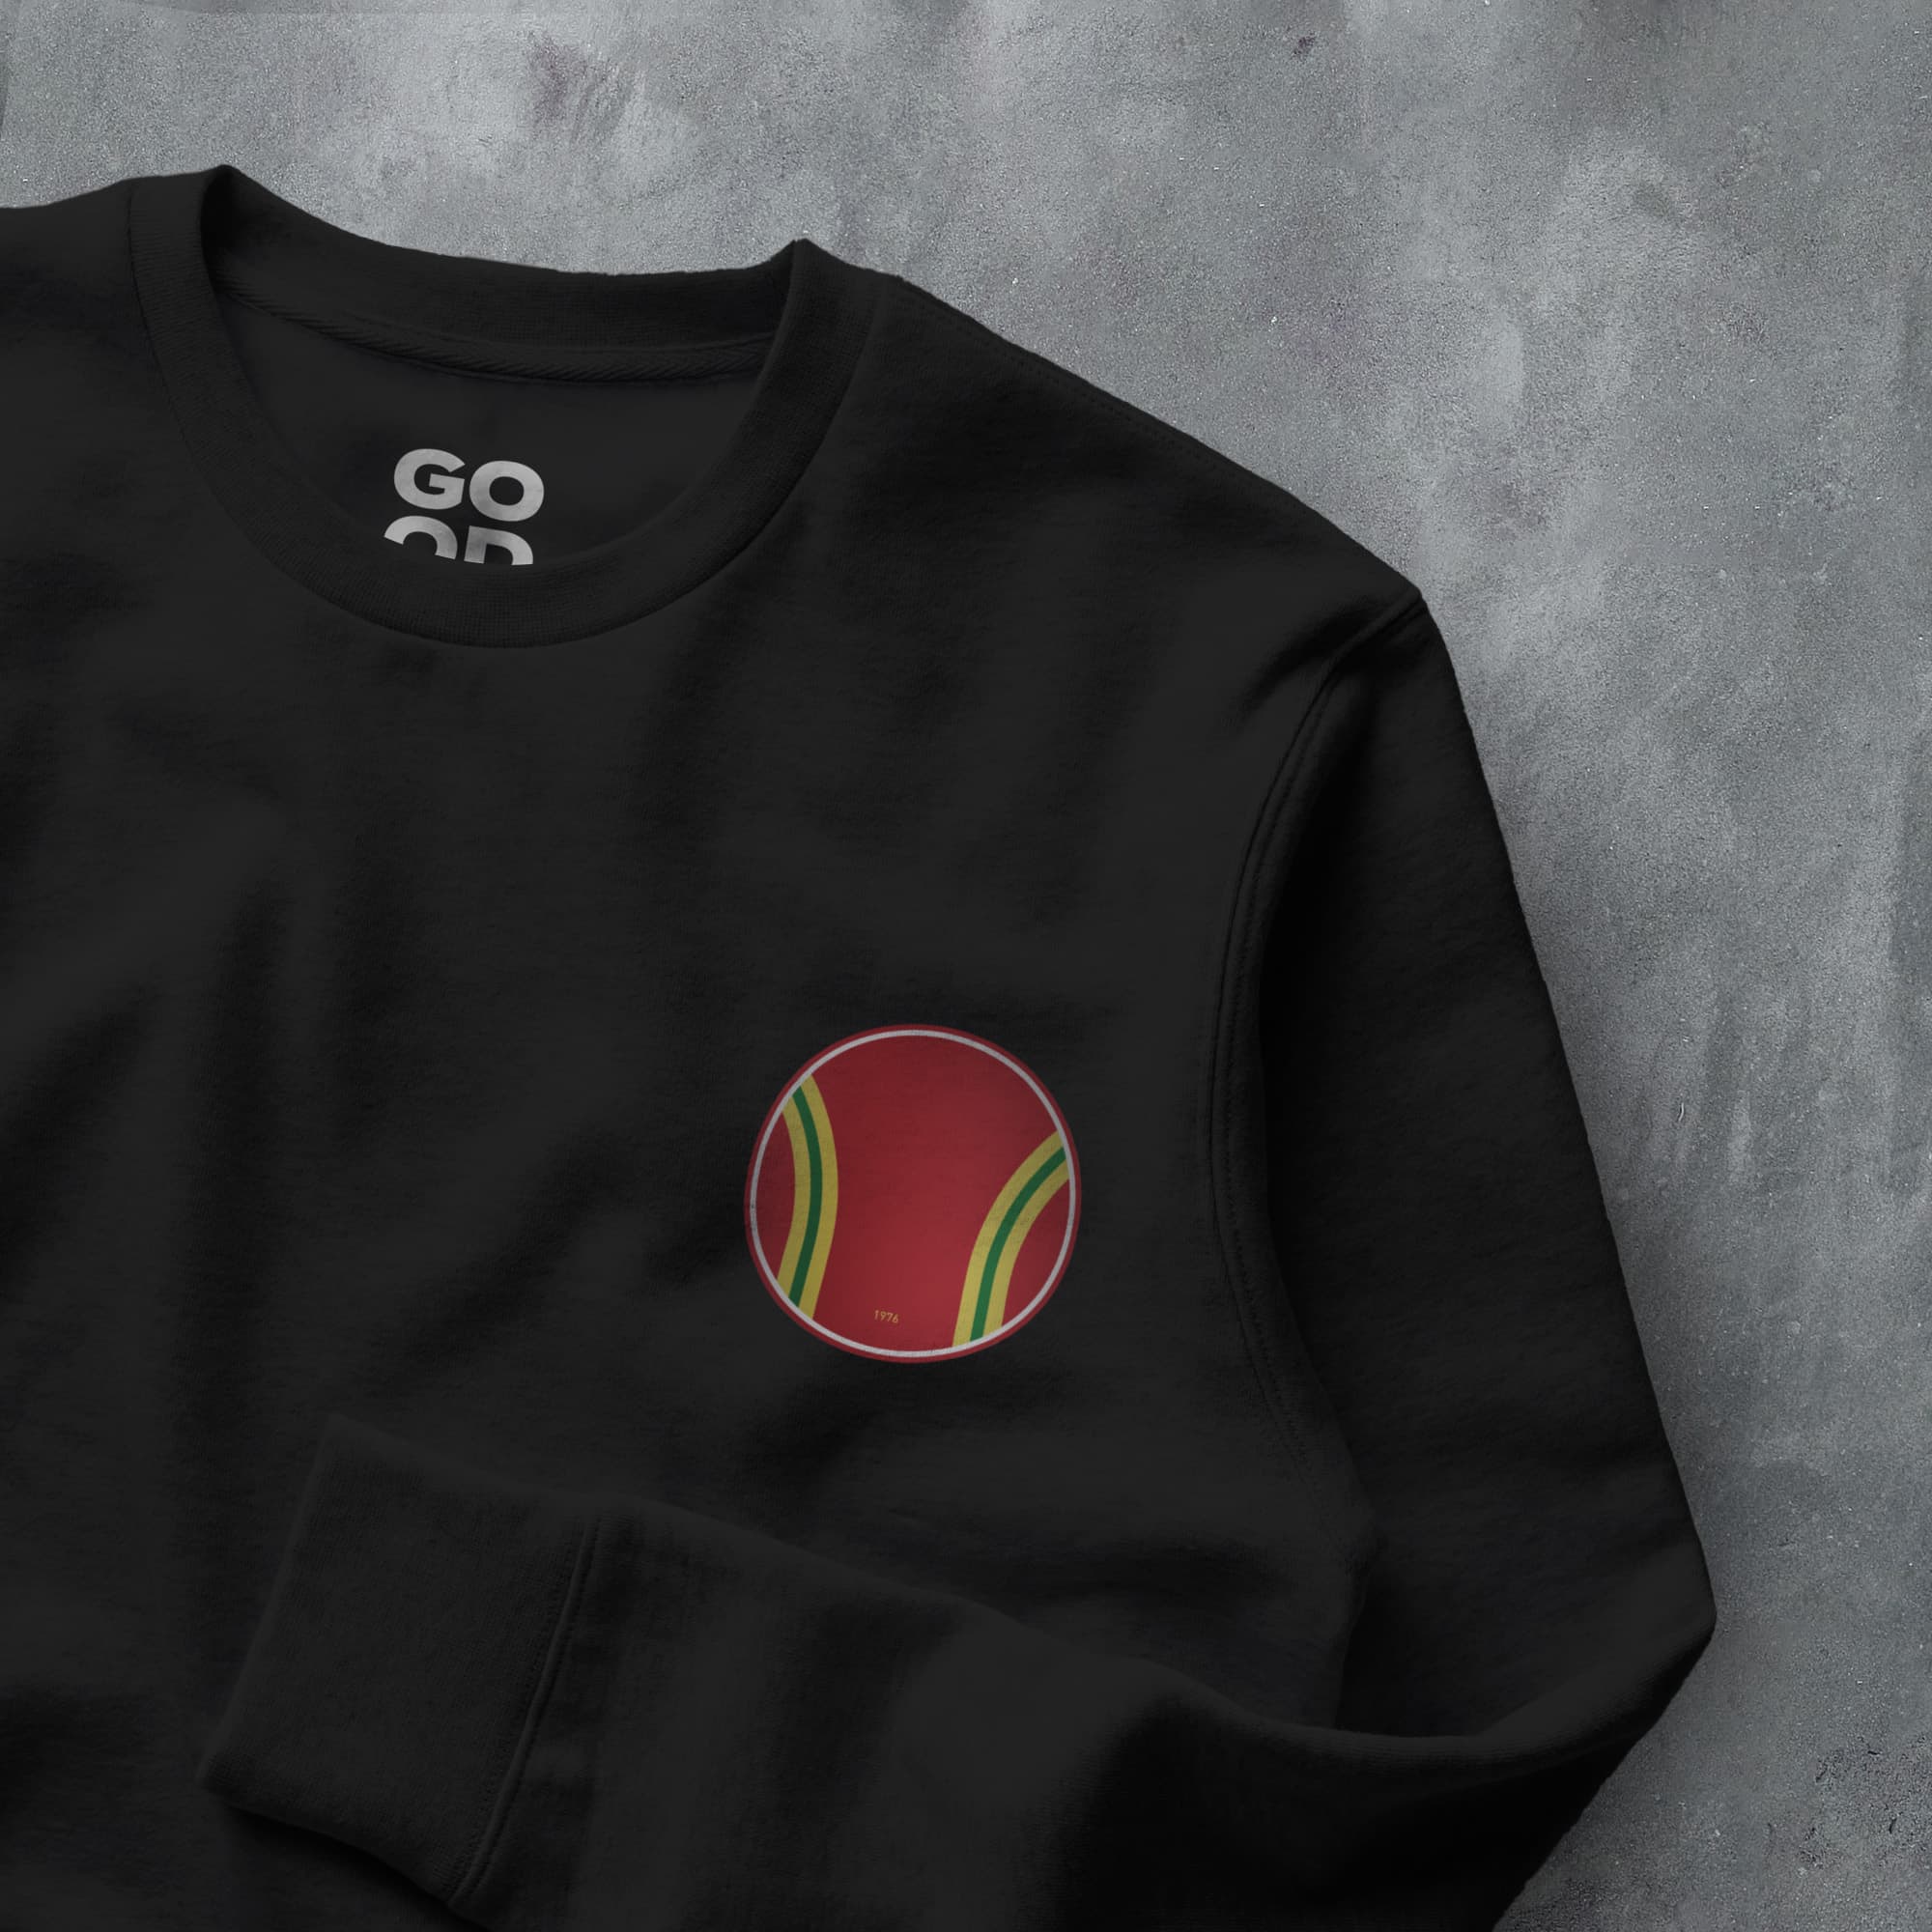 a black sweatshirt with a red and green tennis ball on it